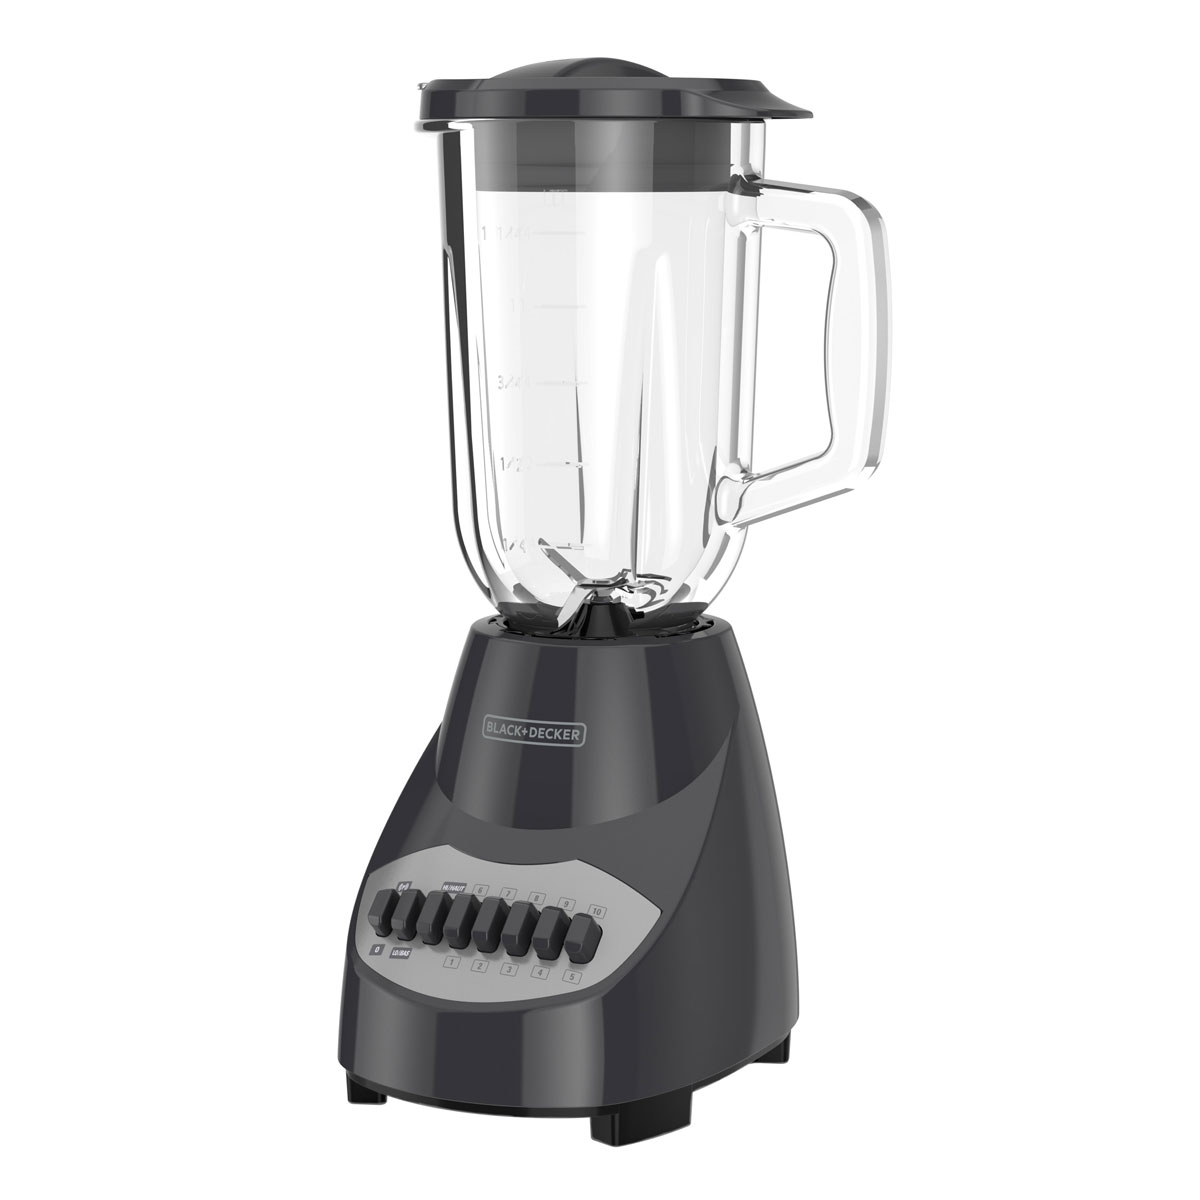 8 High-Speed Blenders in India to Add to Your Kitchen Space - Jd